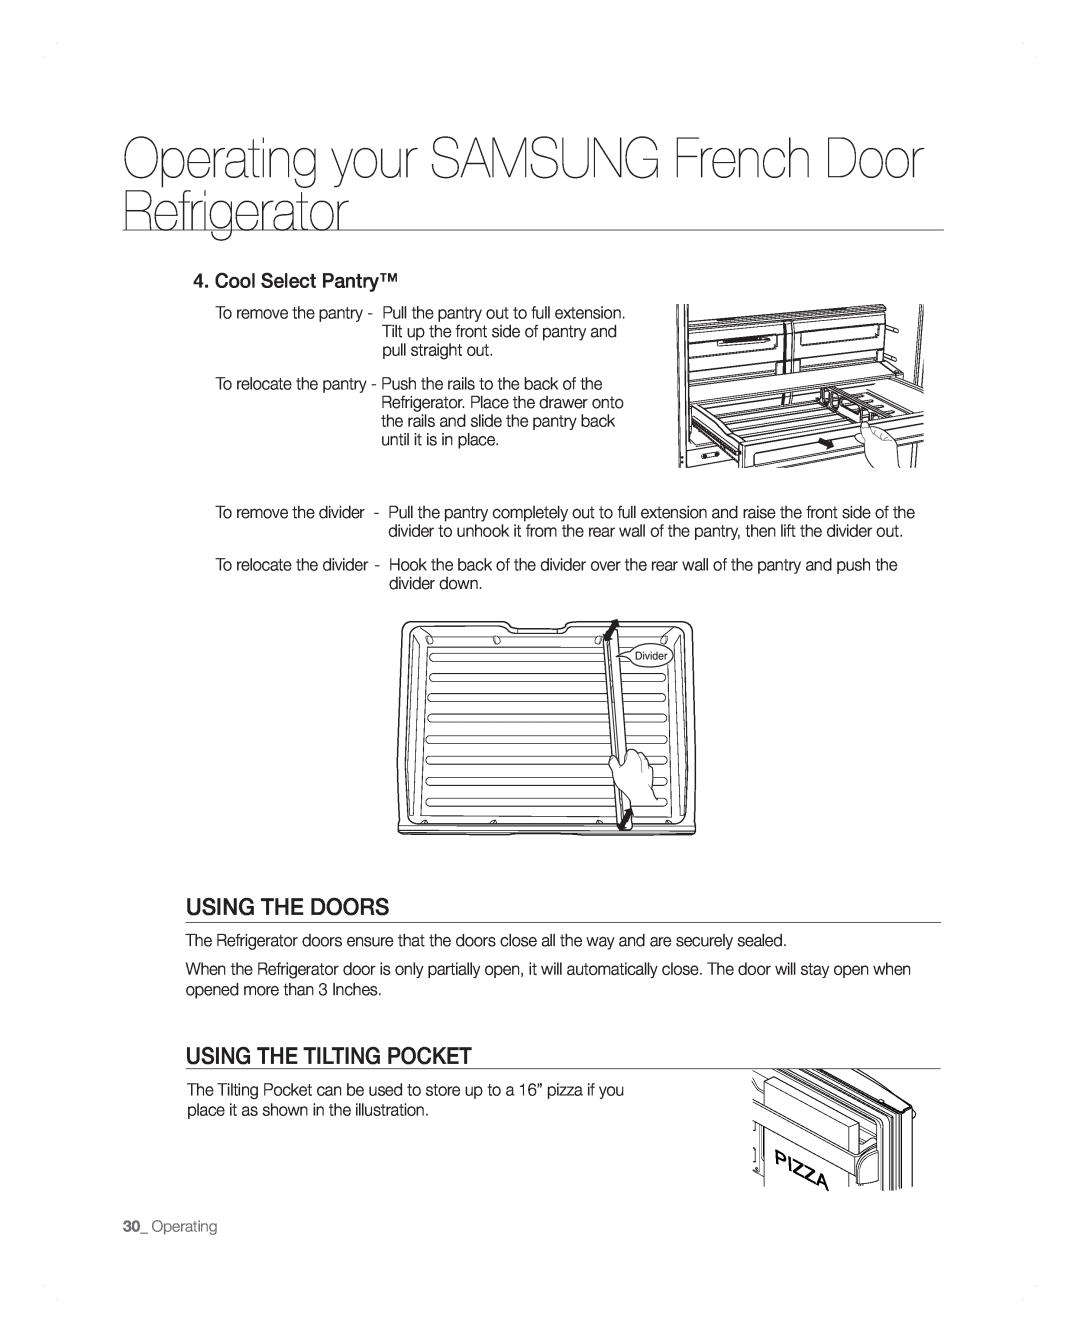 Samsung RFG297AARS user manual using tHe DooRs, usinG tHE tiLtinG PoCKEt, Operating your SAMSUNG French Door Refrigerator 